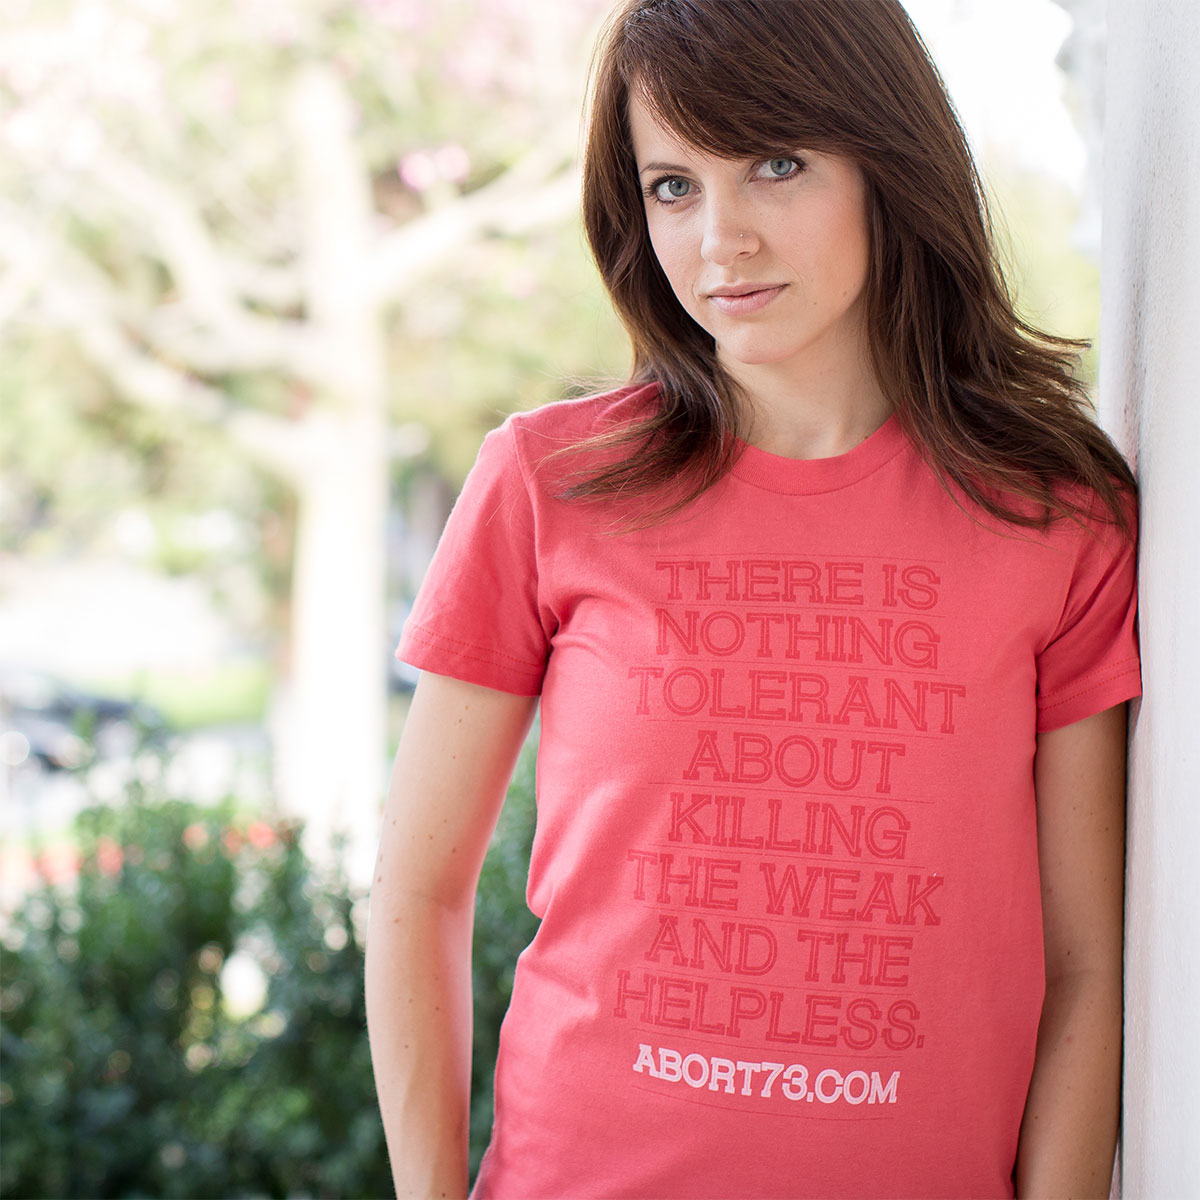 There is Nothing Tolerant About Killing the Weak and the Helpless. (Abort73 Girls Organic T-shirt)